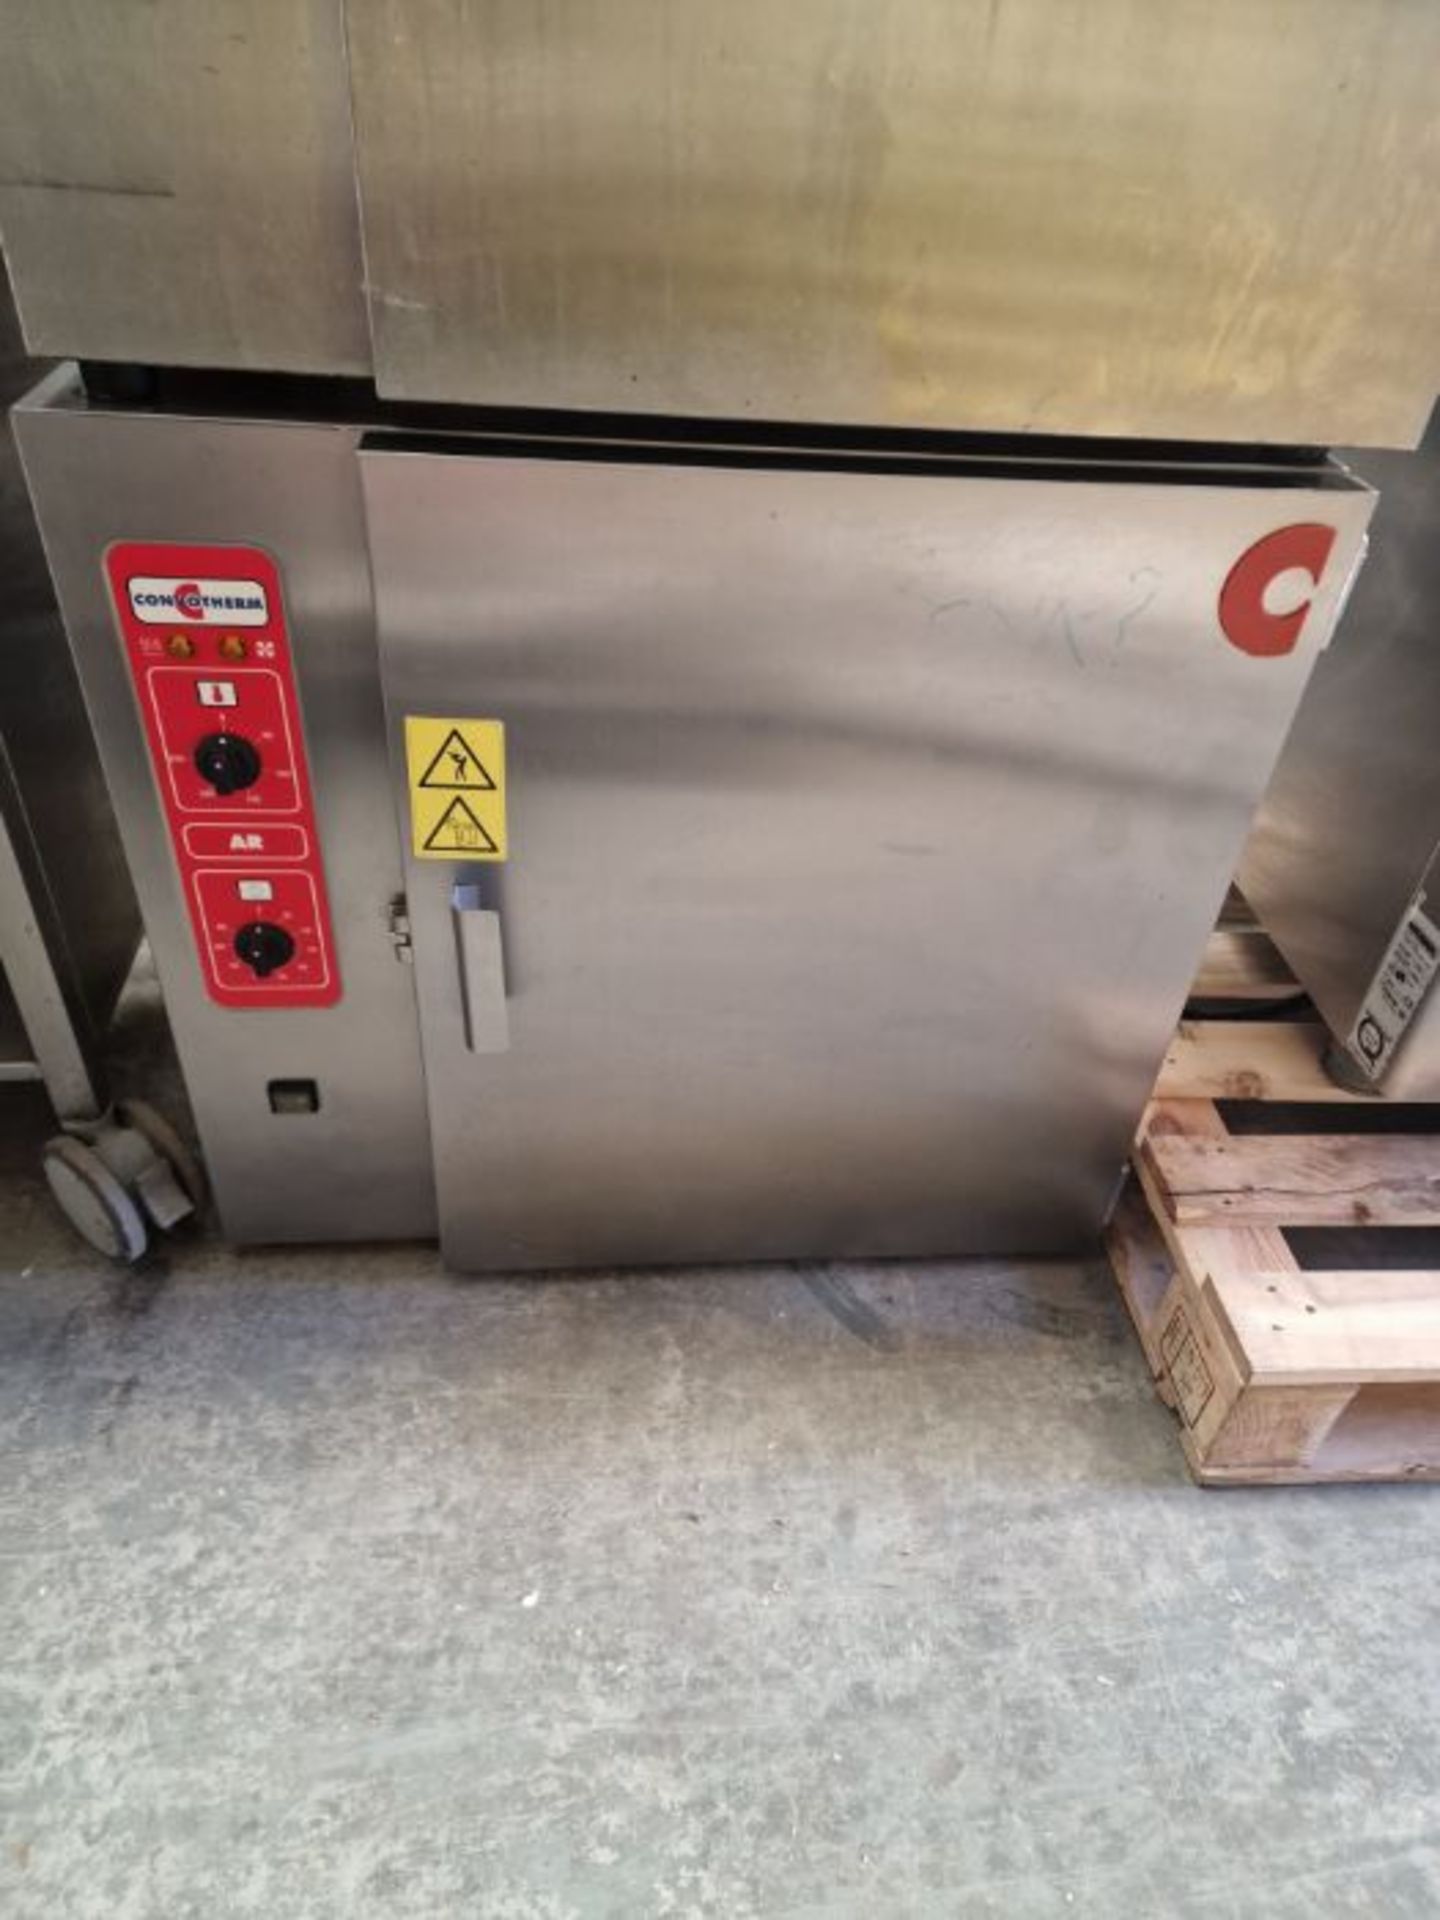 Convotherm convection oven..